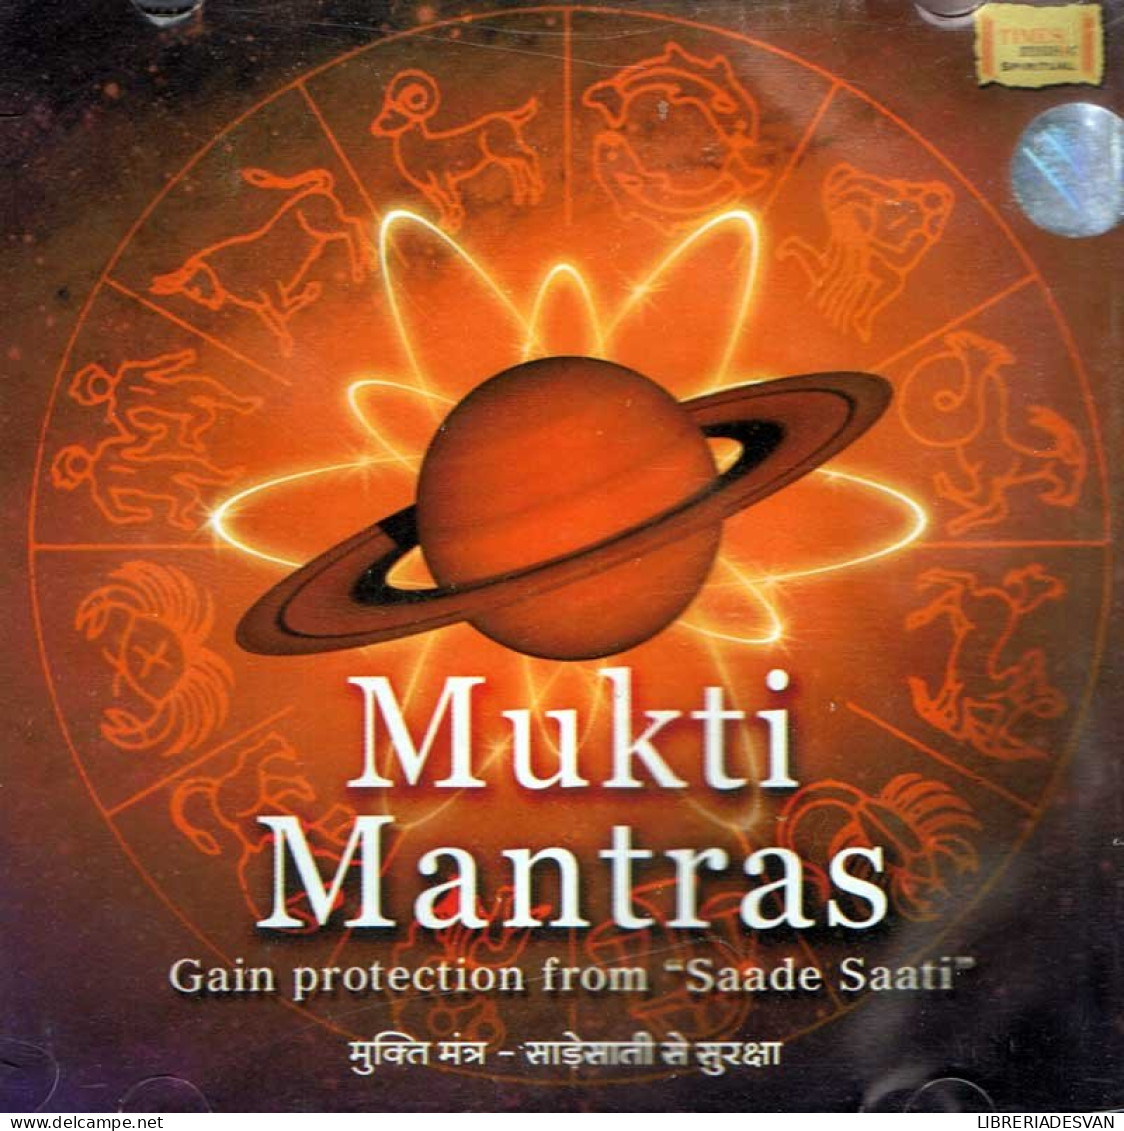 Mukti Mantras Gain Protection From Saade Saati. CD - New Age